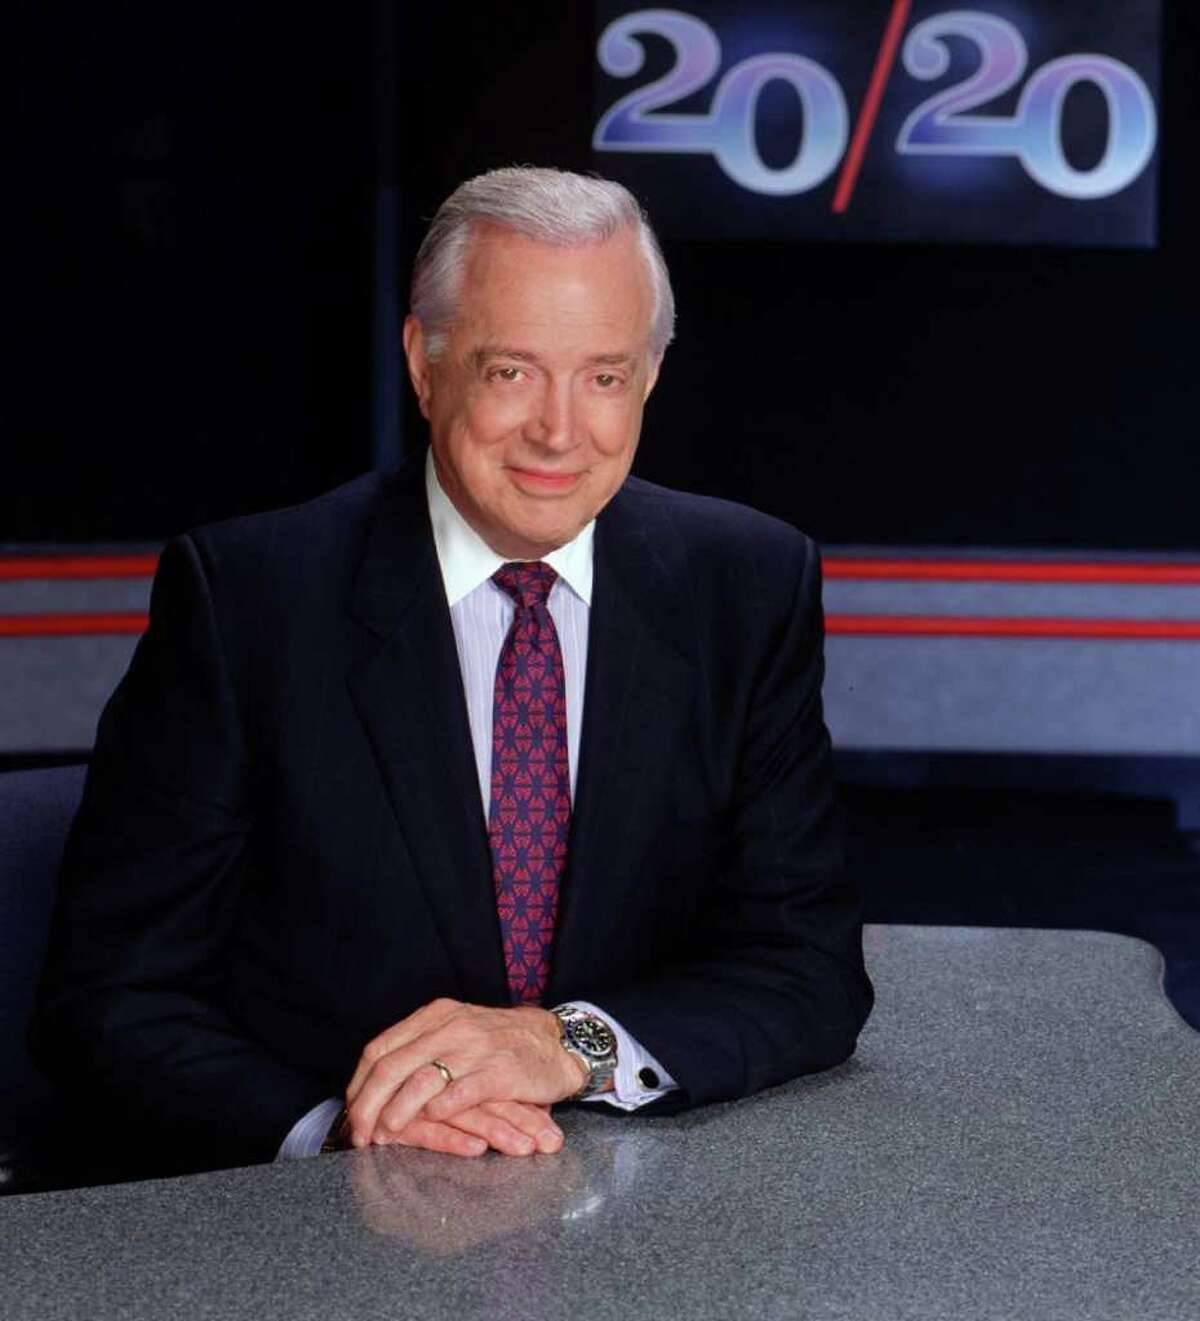 ADVANCE FOR FRIDAY, SEPT. 24--FILE--Hugh Downs is shown on the set of the ABC News magazine '20/20,' in this 1993 publicity photo. After tonight's '20/20,' Downs will end a 21 year stint as the program's anchor to begin an internet career with iNEXTV, a Web startup covering the government's executive branch. (AP Photo/ABC, Steve Fenn)